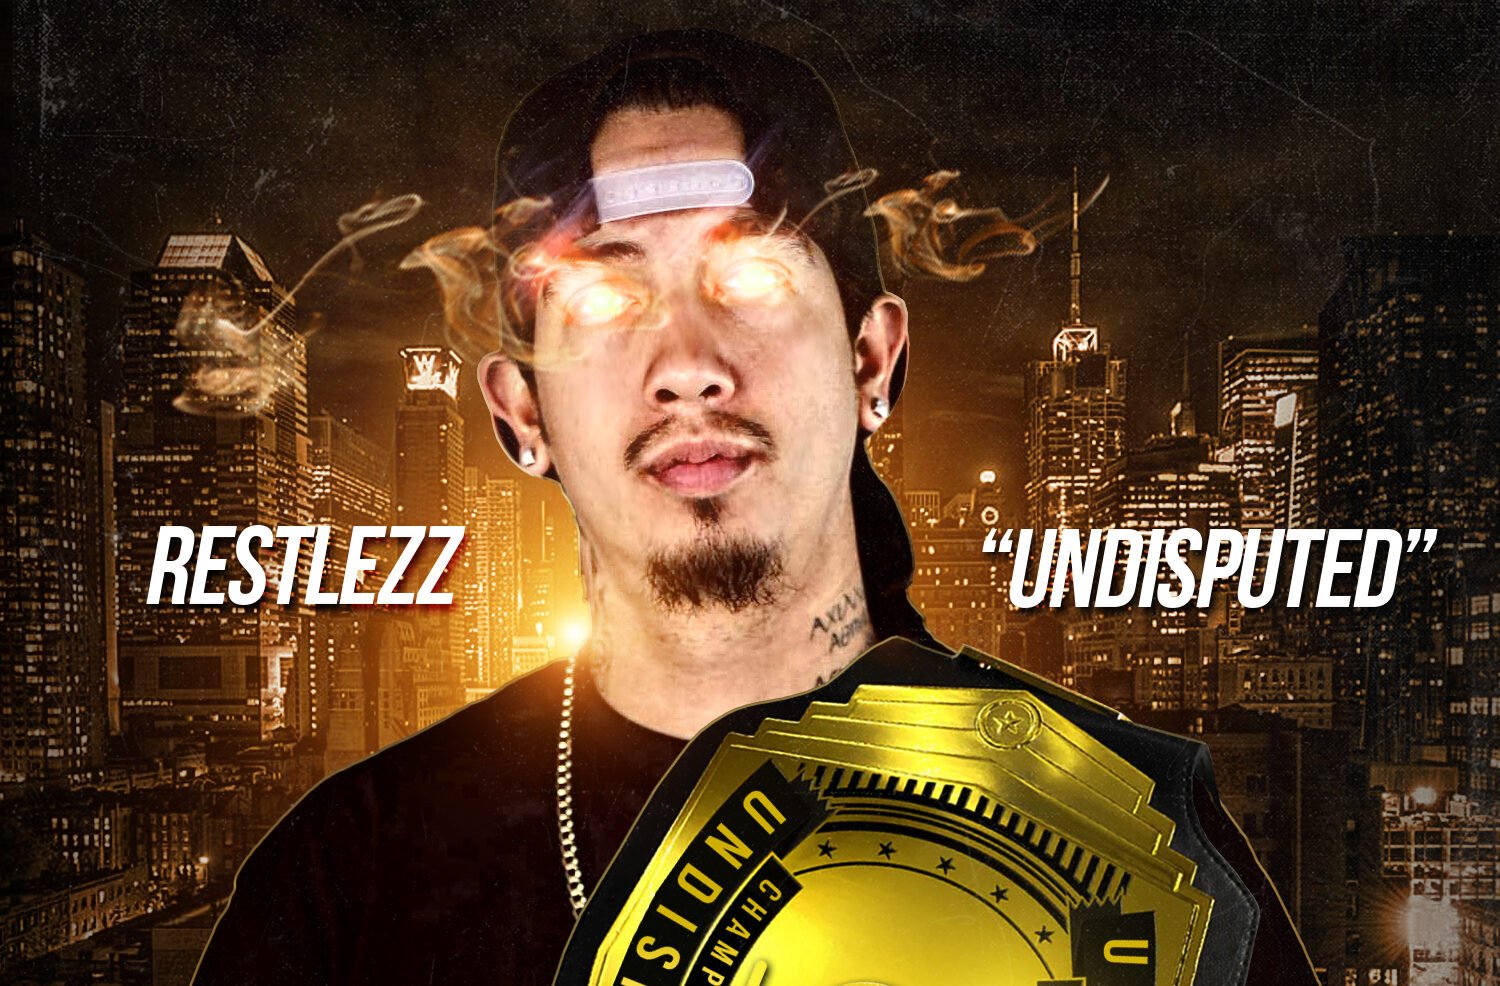 Renowned Artist Restlezz Releases His Highly Anticipated New Single, "Undisputed"